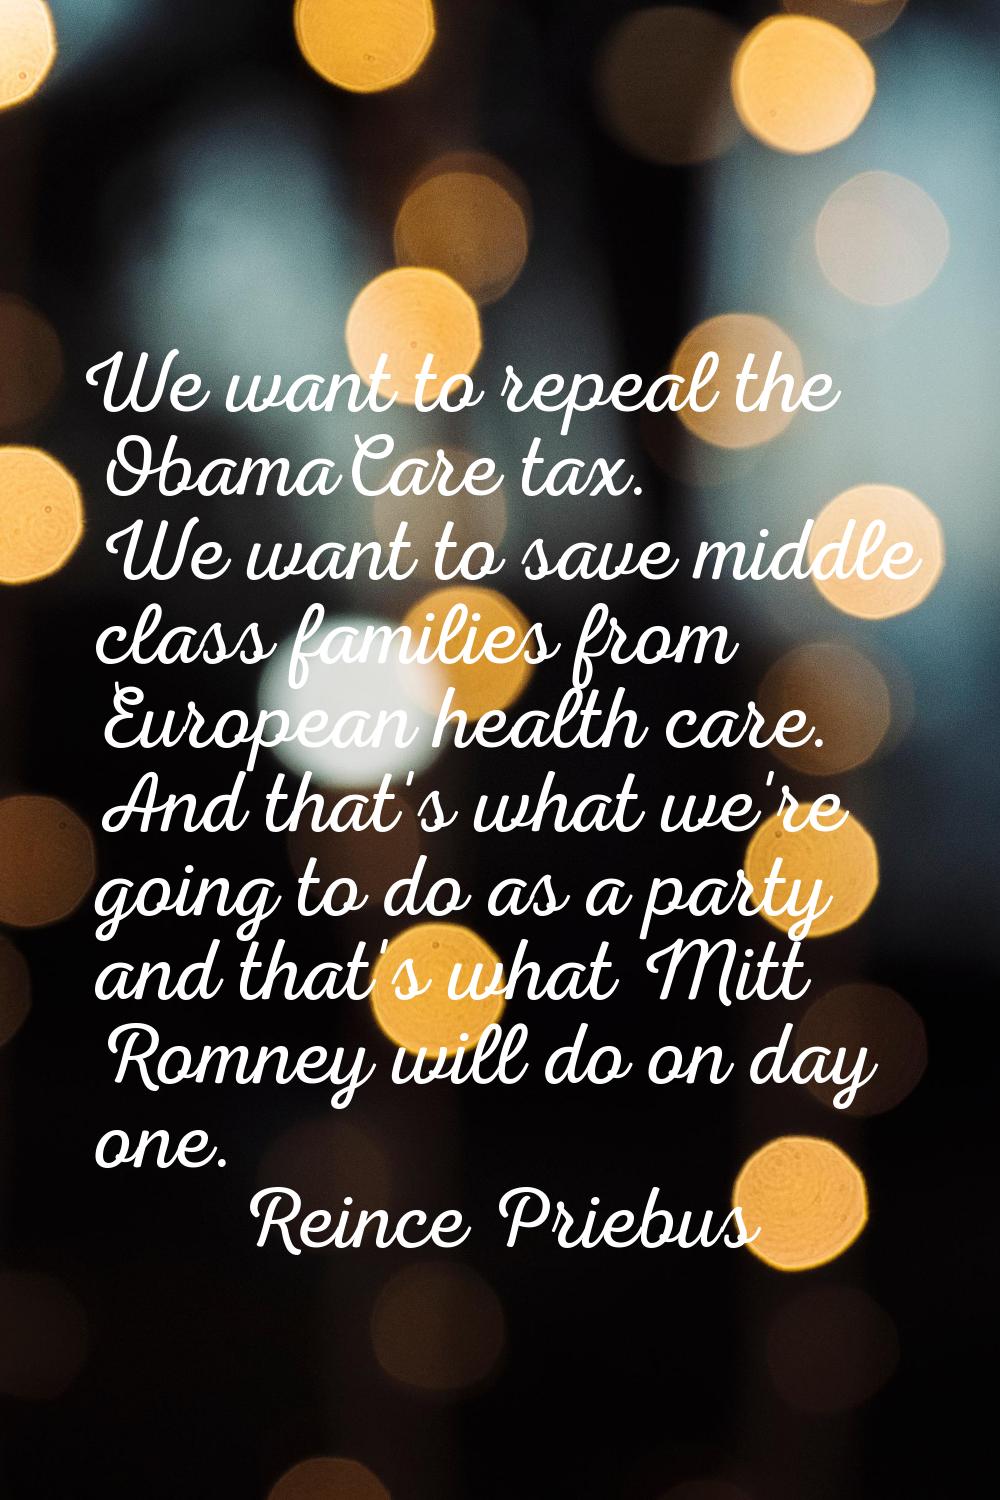 We want to repeal the ObamaCare tax. We want to save middle class families from European health car